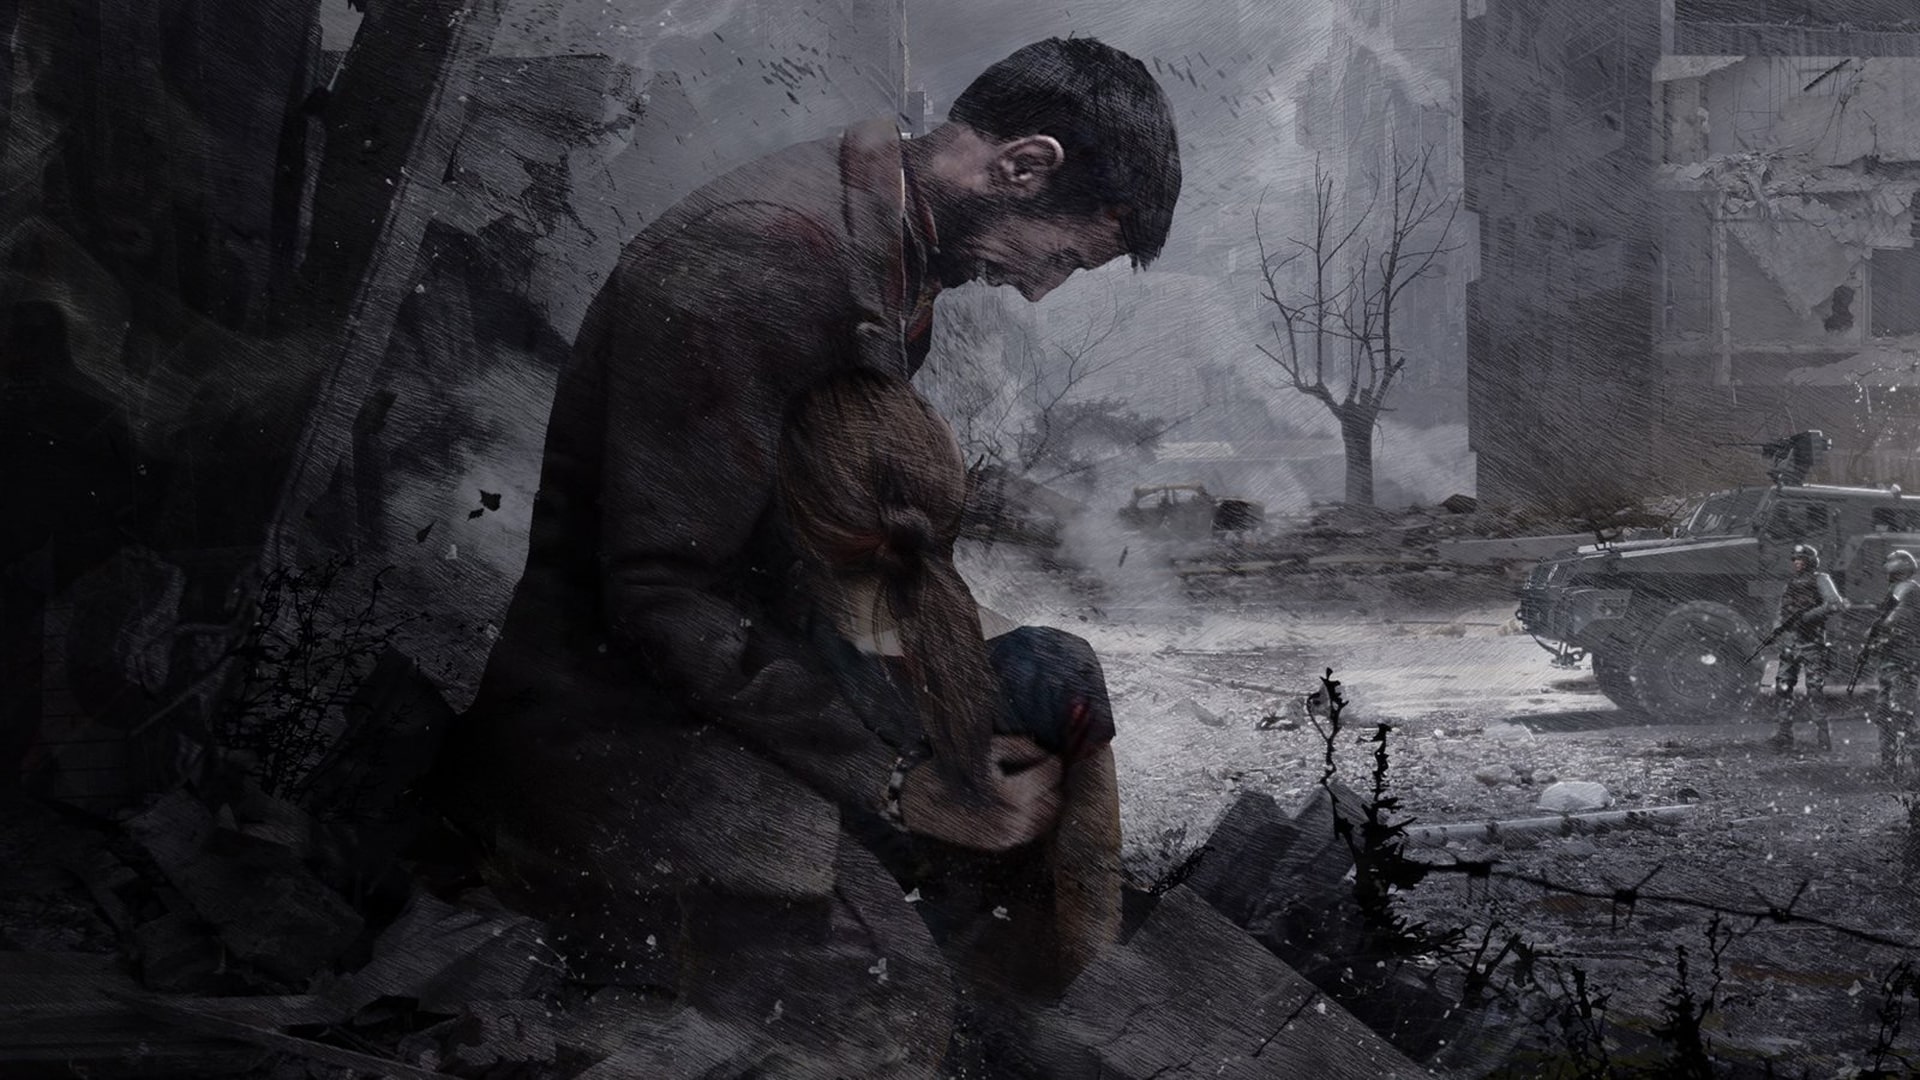 Captivating in-game scene from This War of Mine, showing the civilian impact of war